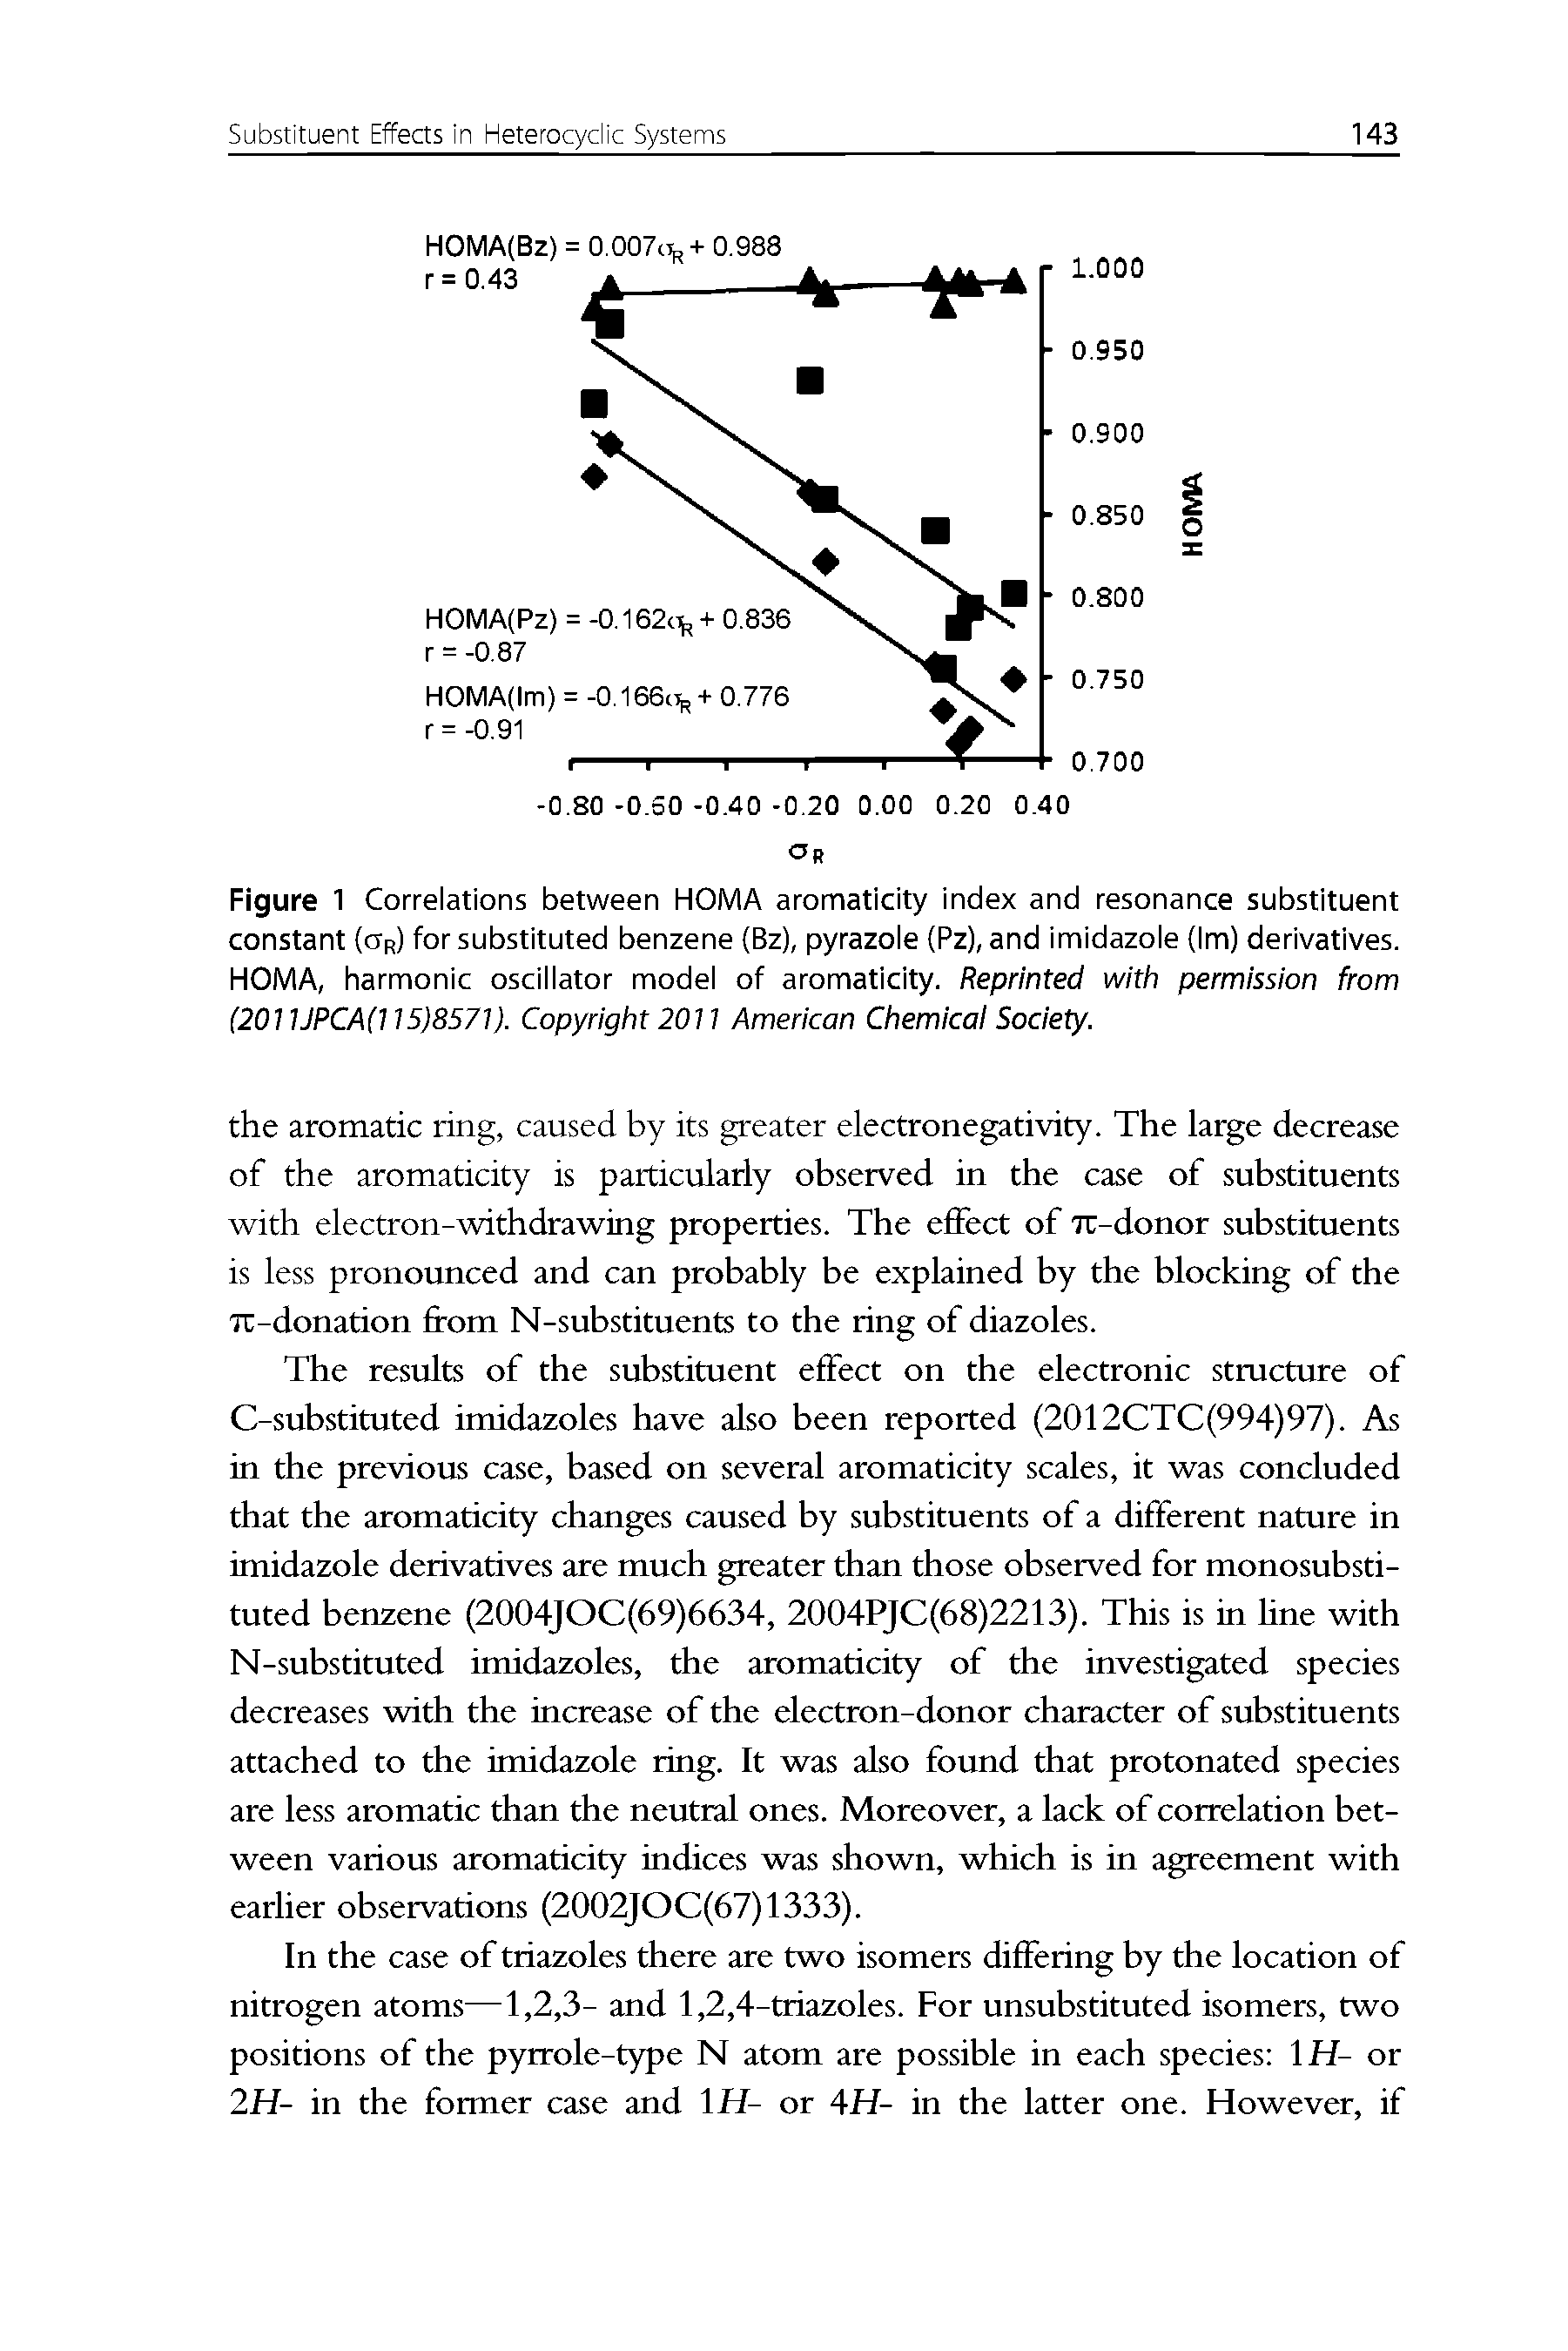 Figure 1 Correlations between HOMA aromaticity index and resonance substituent constant (cjr) for substituted benzene (Bz), pyrazole (Pz), and imidazole (Im) derivatives. HOMA, harmonic oscillator model of aromaticity. Reprinted with permission from (20nJPCA(ii 5)8571). Copyright 2011 American Chemicai Society.